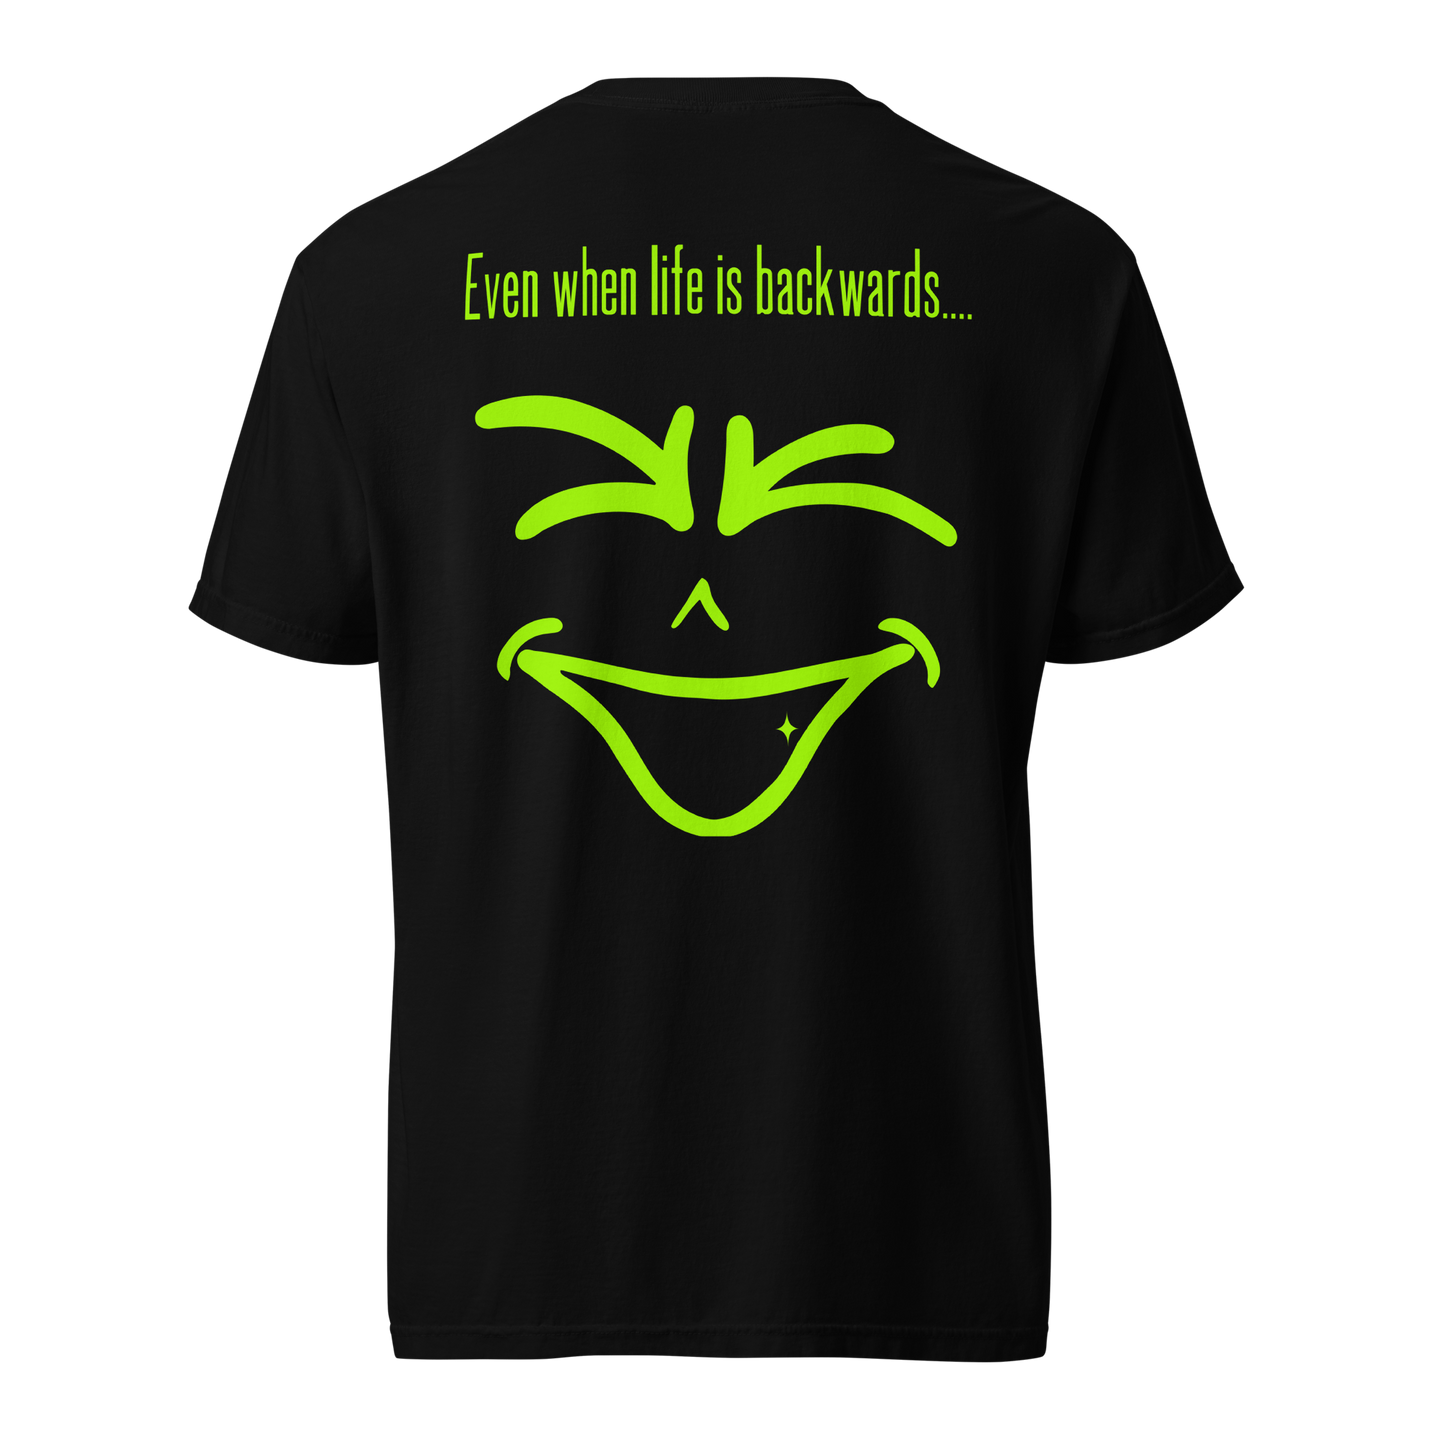 Original Over Sized Tee: Lime Green